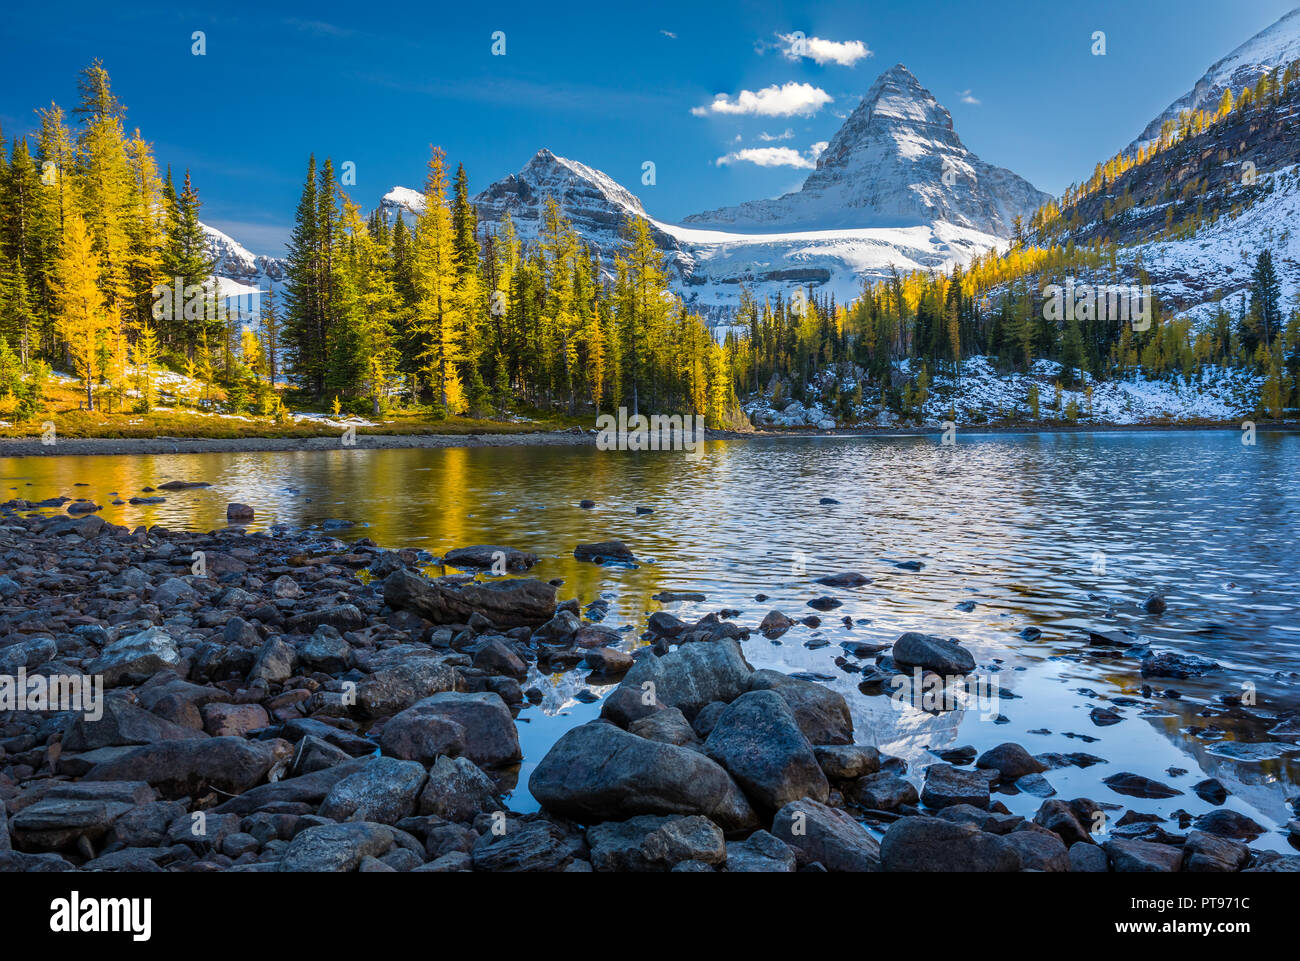 Mount Assiniboine Provincial Park is a provincial park in British Columbia, Canada, located around Mount Assiniboine. Stock Photo